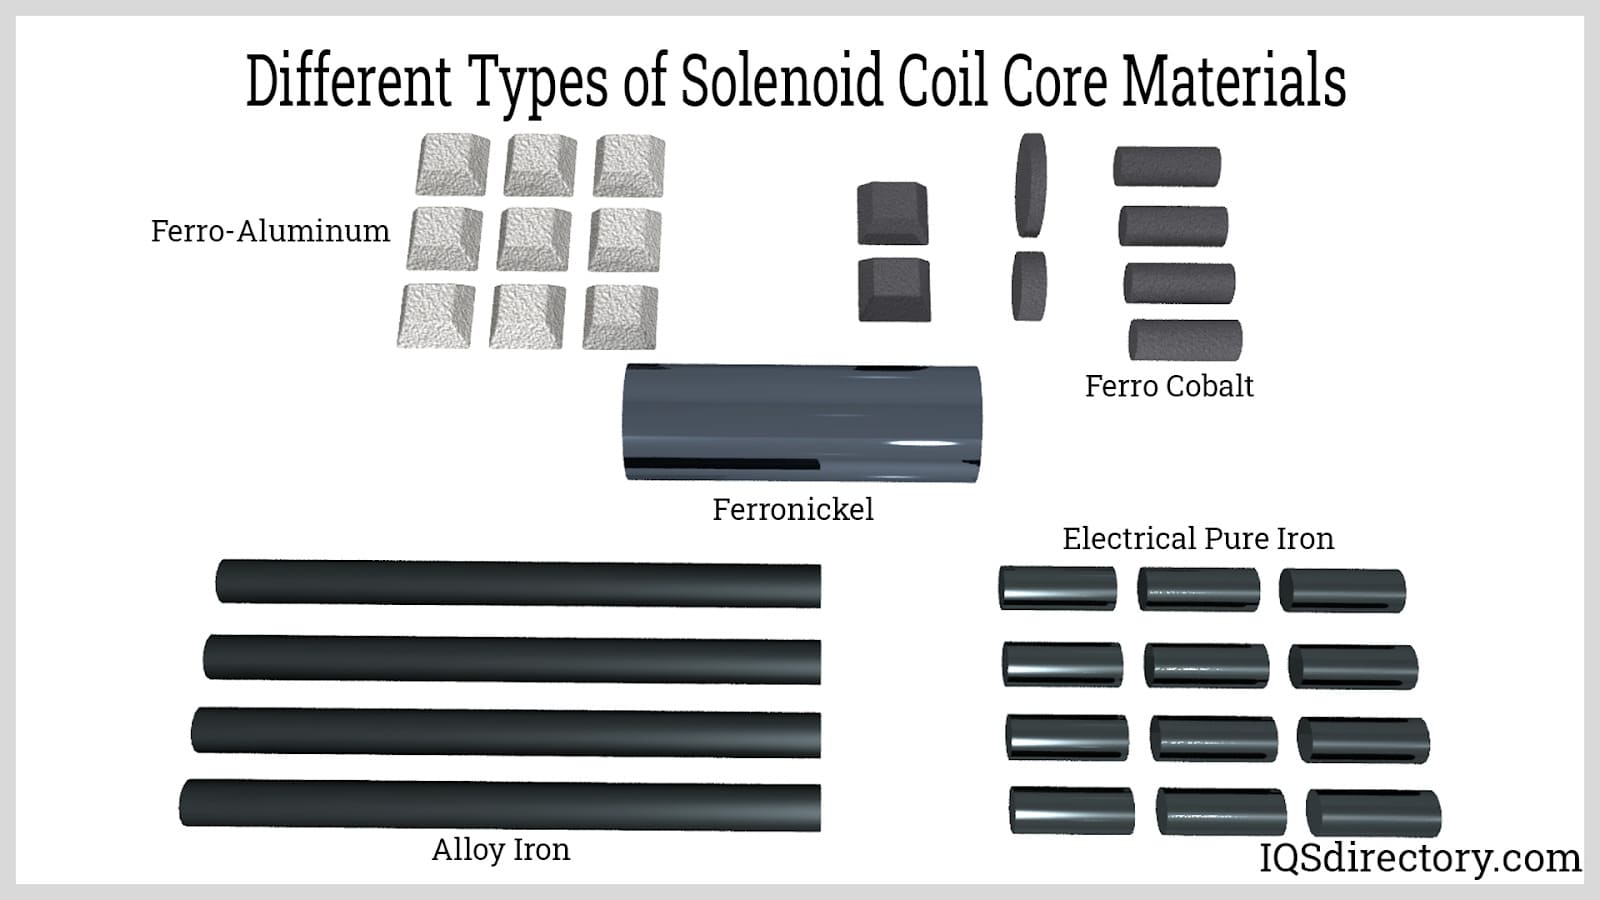 Different Types of Solenoid Coil Core Materials